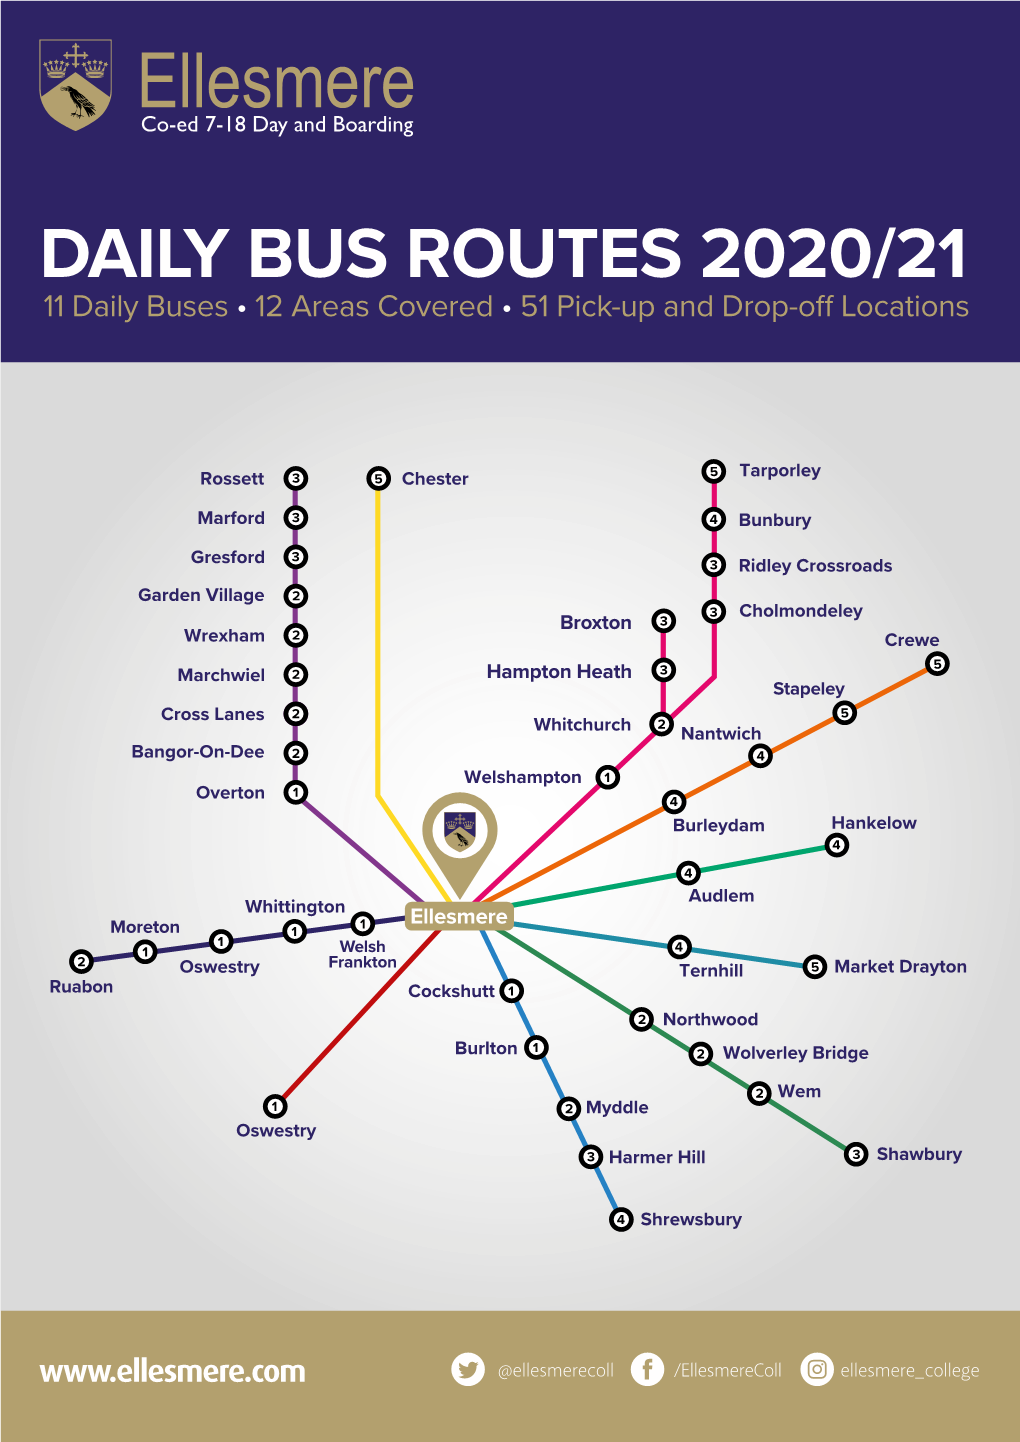 DAILY BUS ROUTES 2020/21 11 Daily Buses • 12 Areas Covered • 51 Pick-Up and Drop-Off Locations